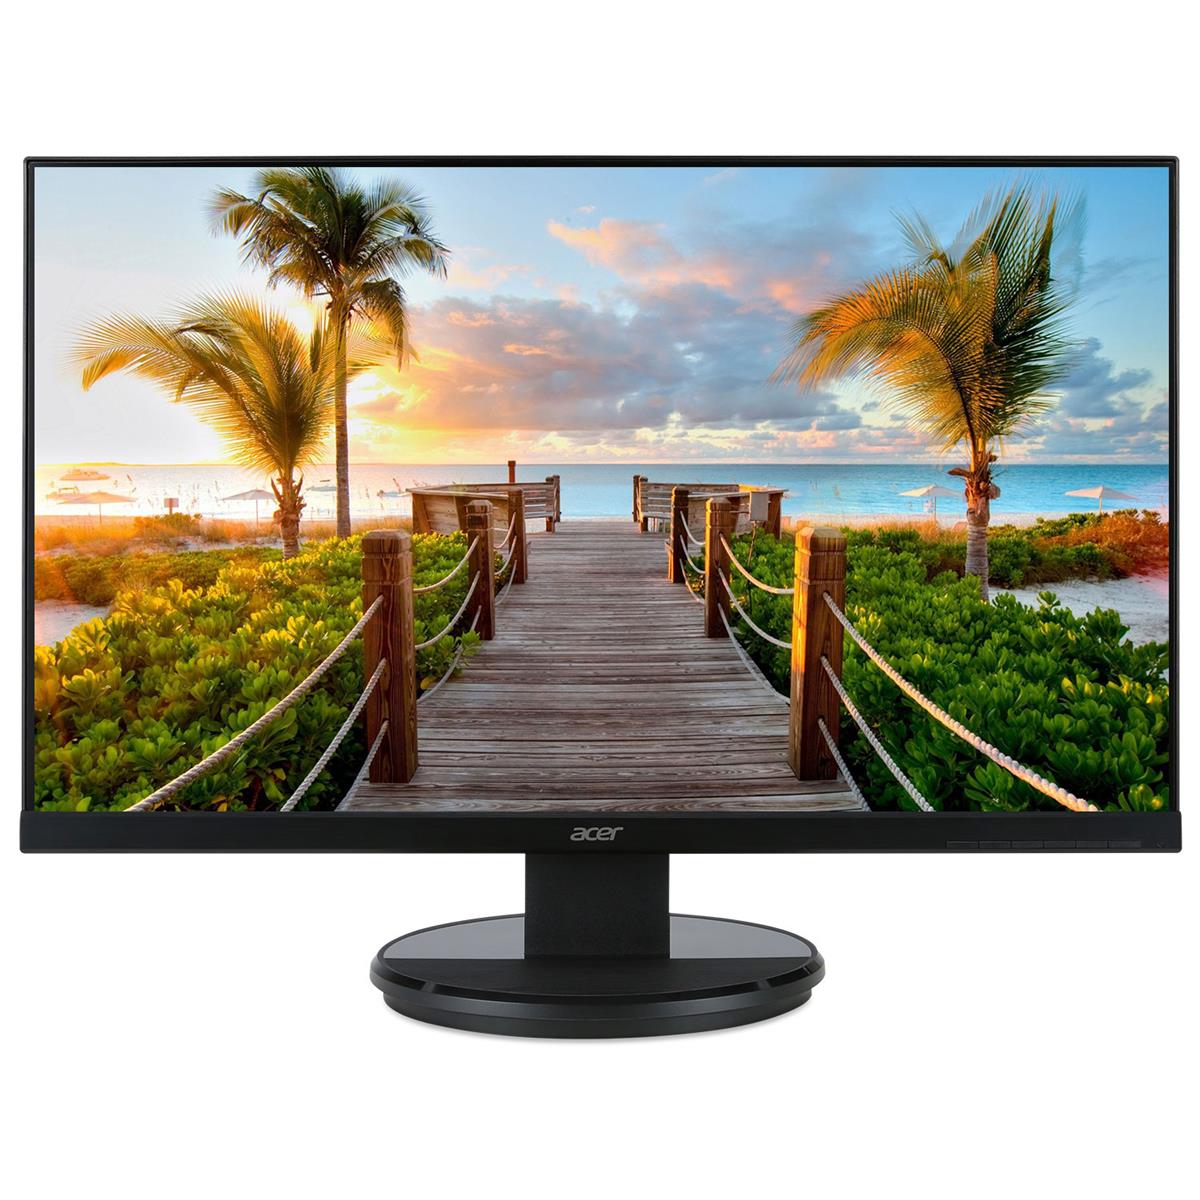 Acer K242HYL -  Budget-friendly general-purpose monitor